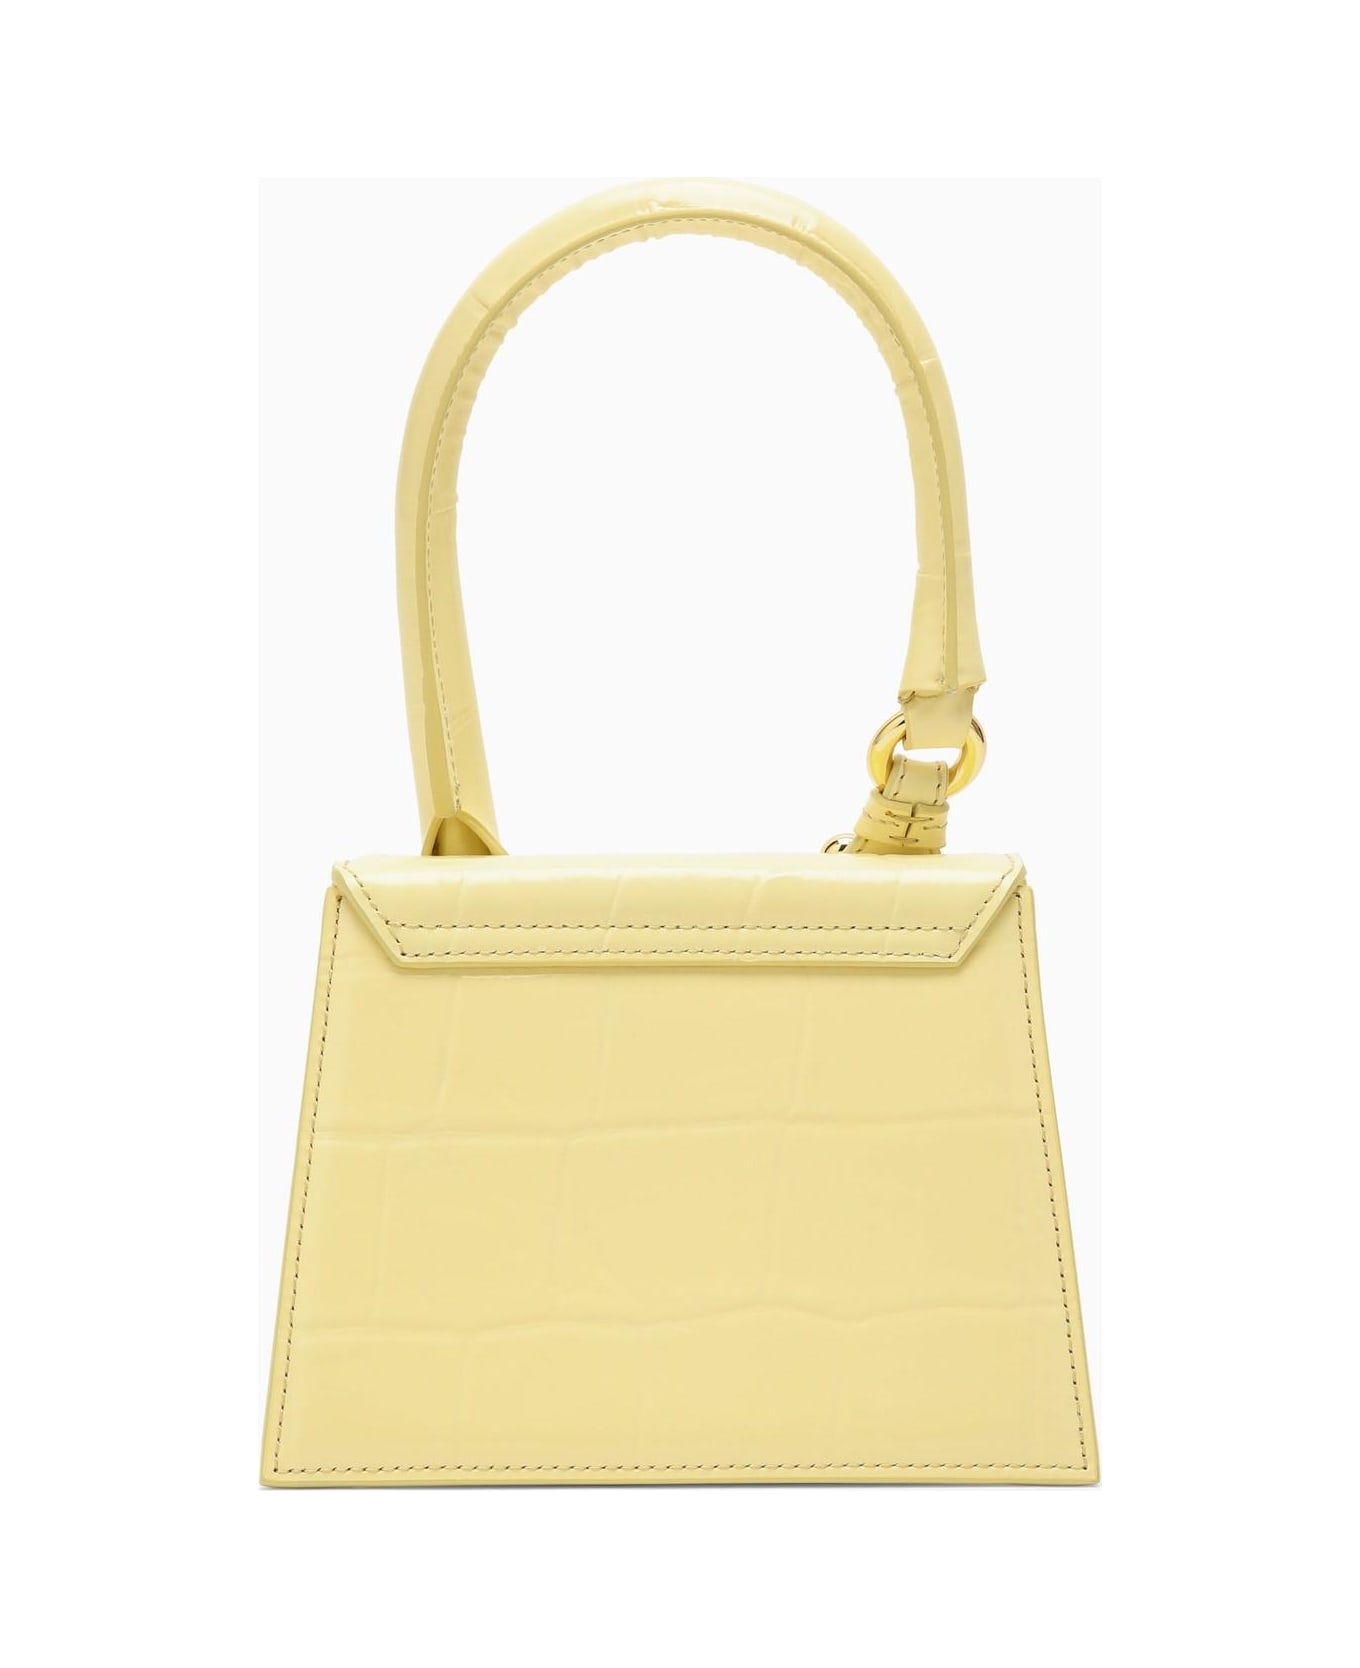 Jacquemus Le Chiquito Moyen Boucle Light Yellow Embossed Leather Bag - YELLOW トートバッグ